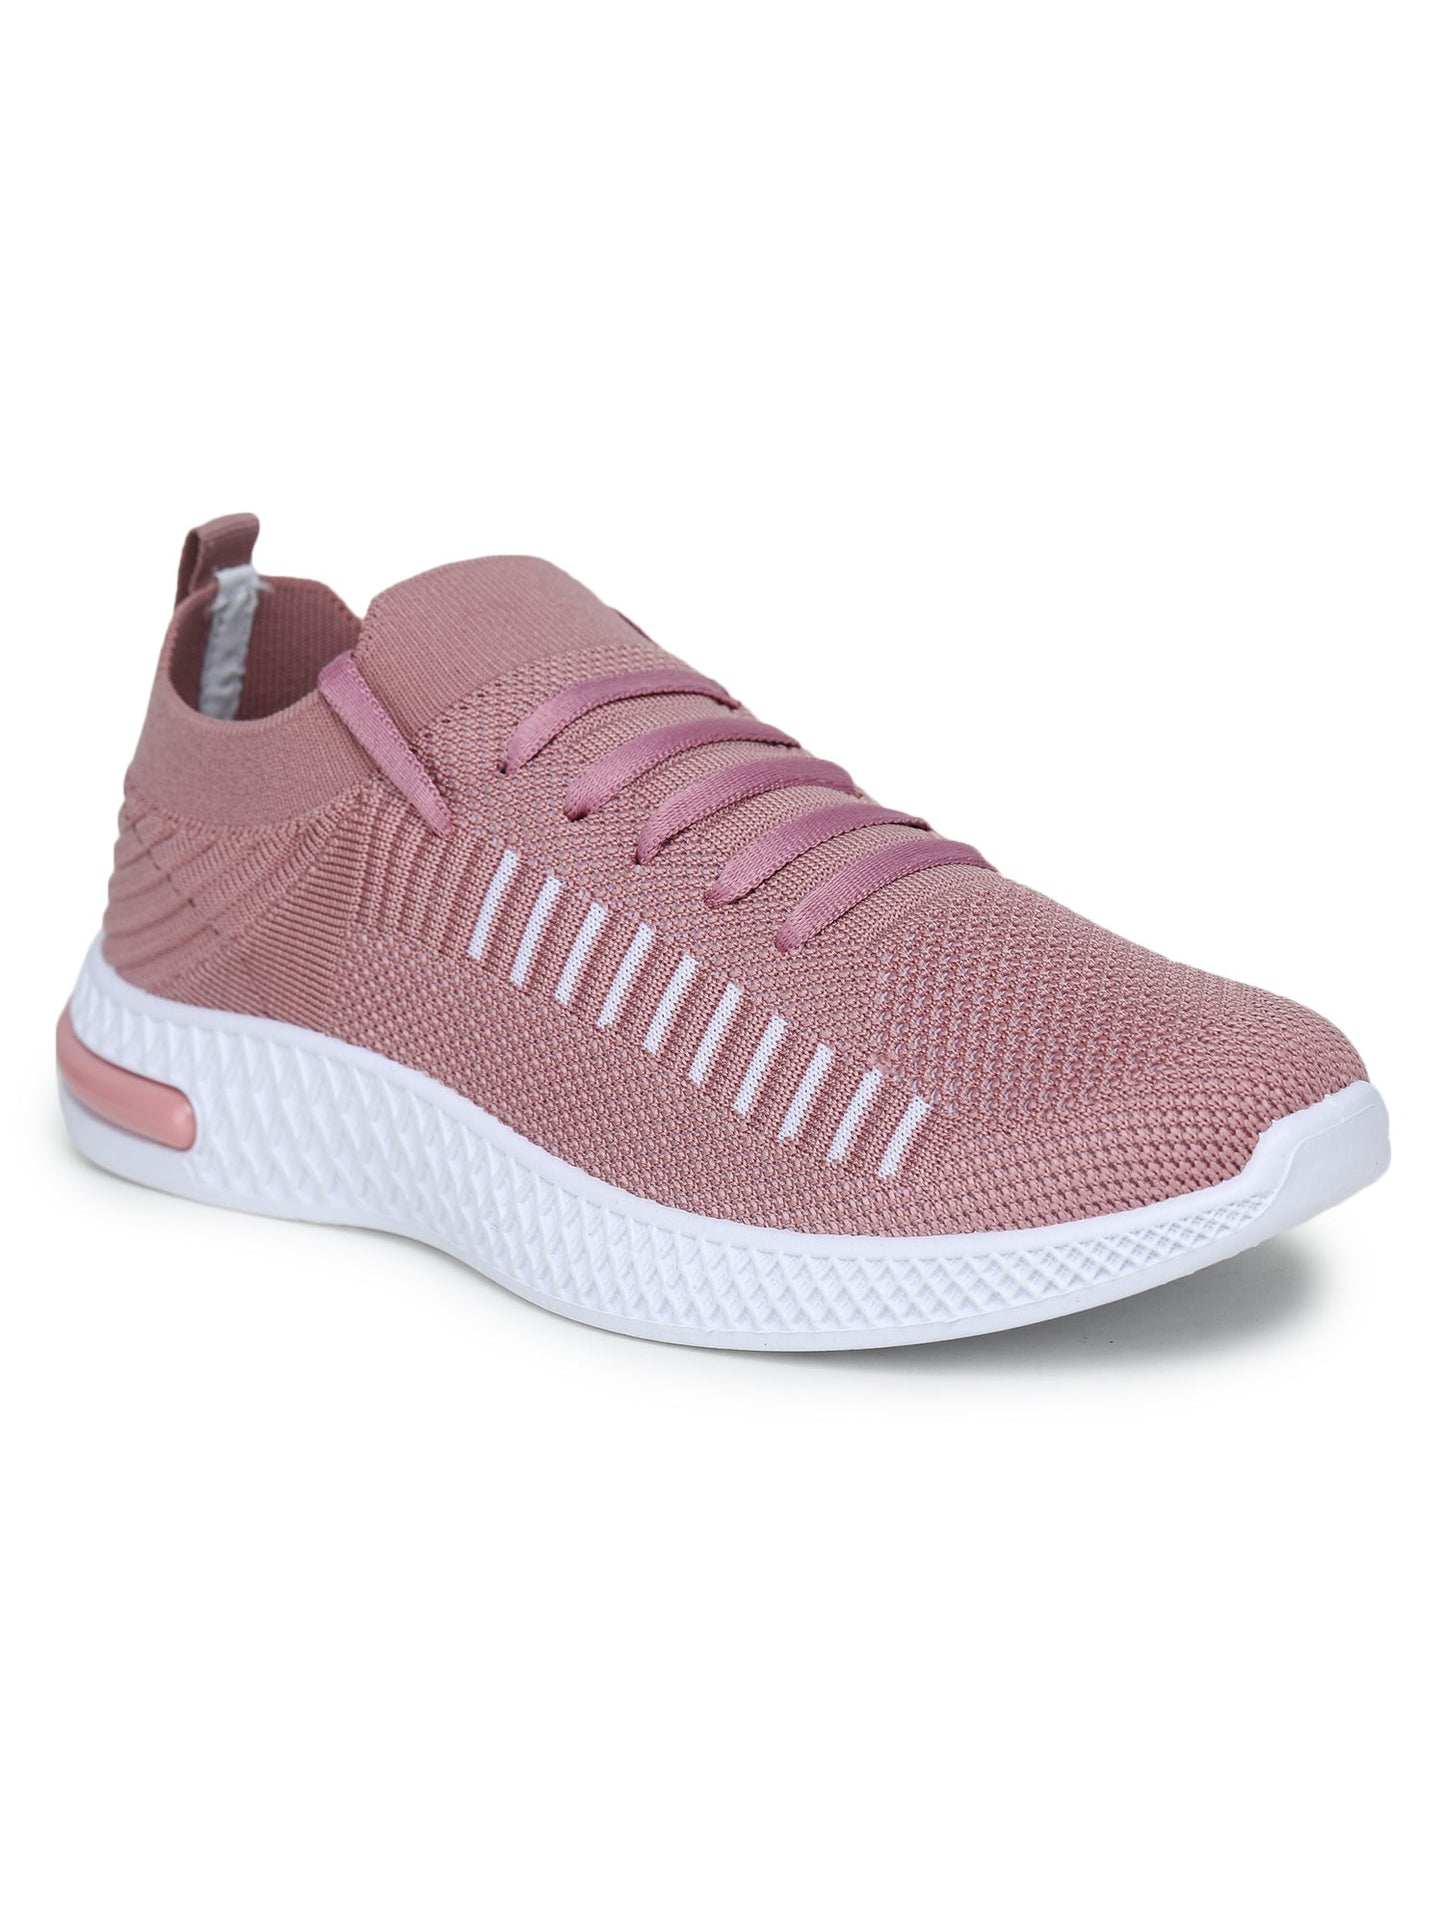 RYLE-O SPORT SHOE  FOR LADIES